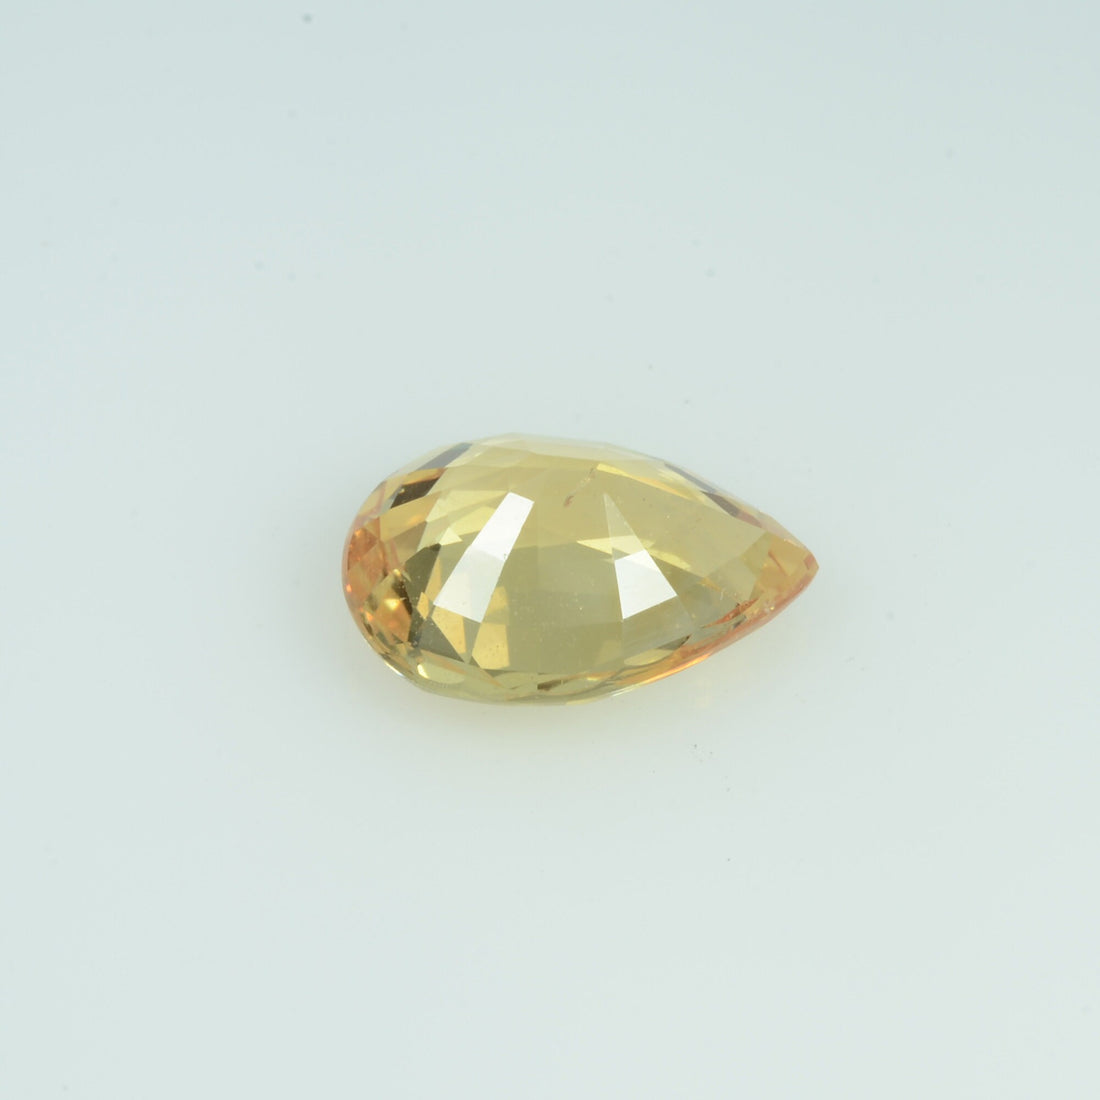 1.96 Cts Natural Golden Yellow Sapphire Loose Gemstone Pear Cut